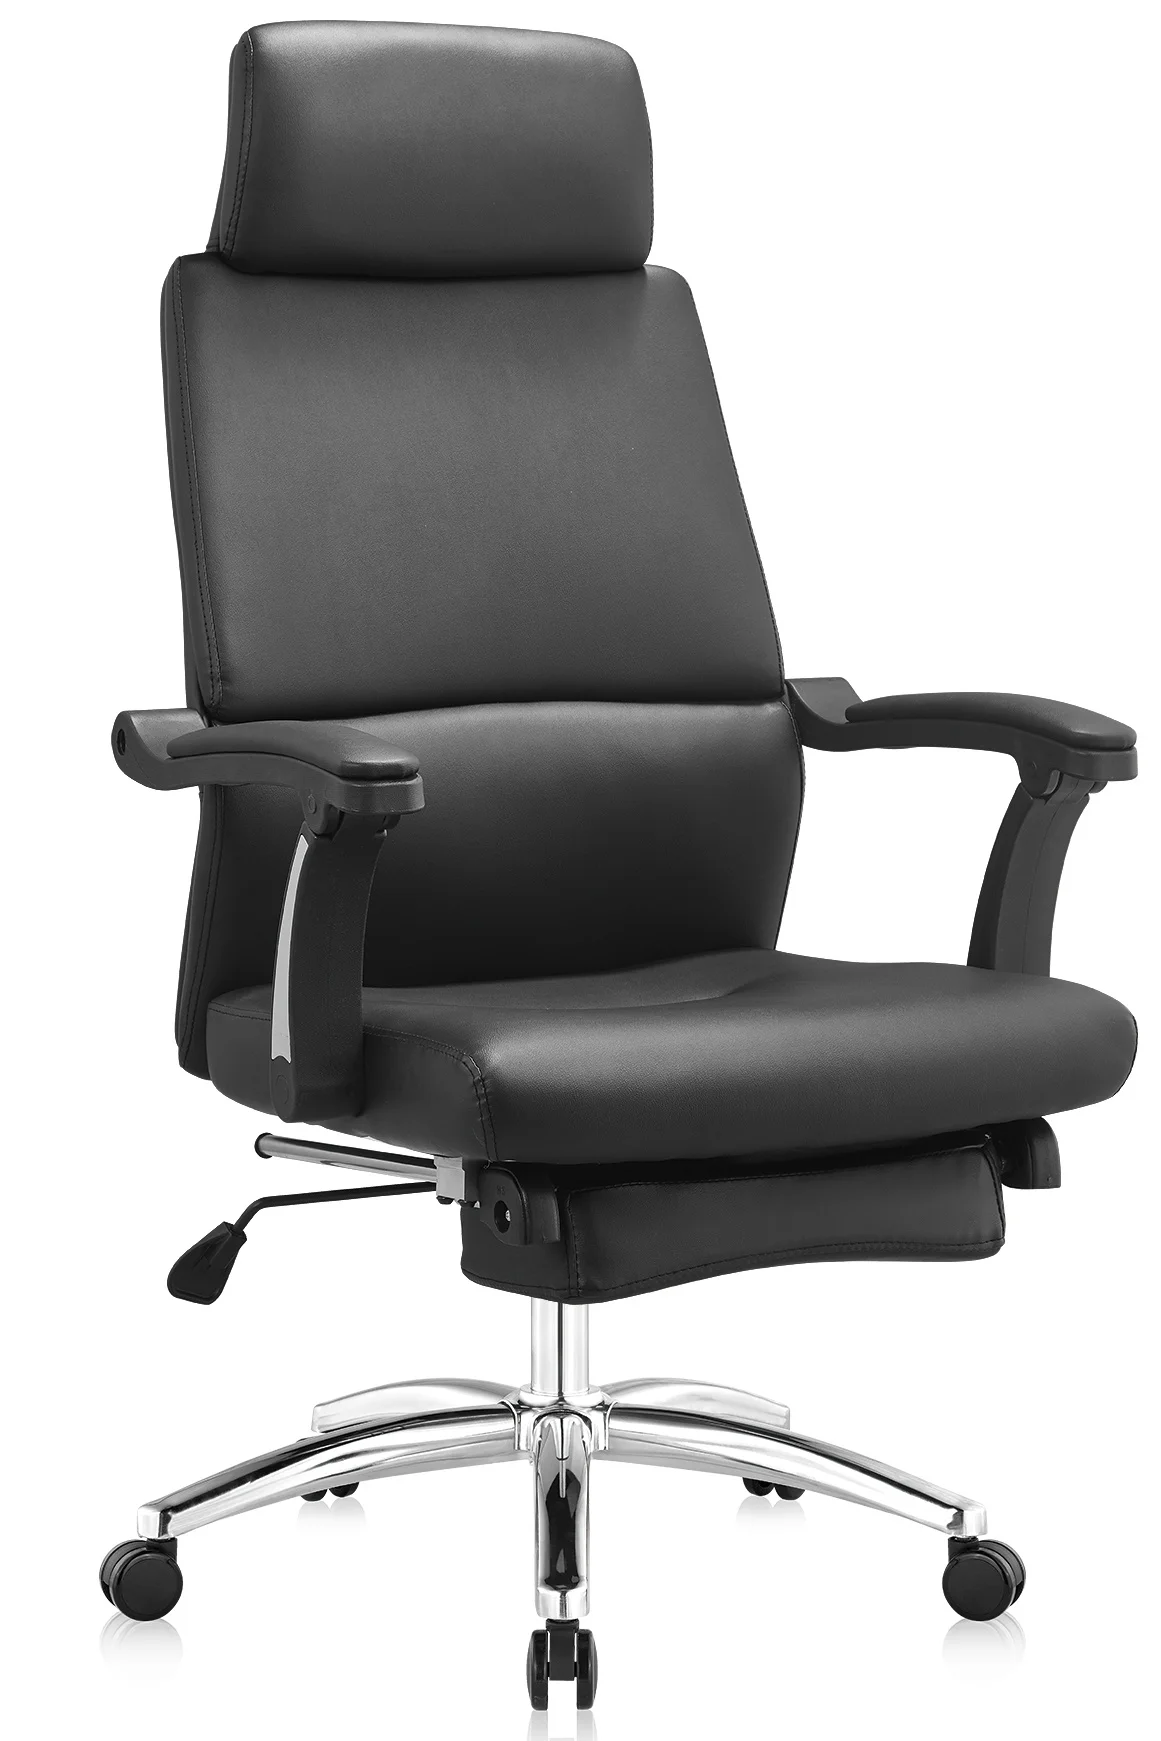 High End Back Reclining Adjustable Sleeping Leather Chair Office